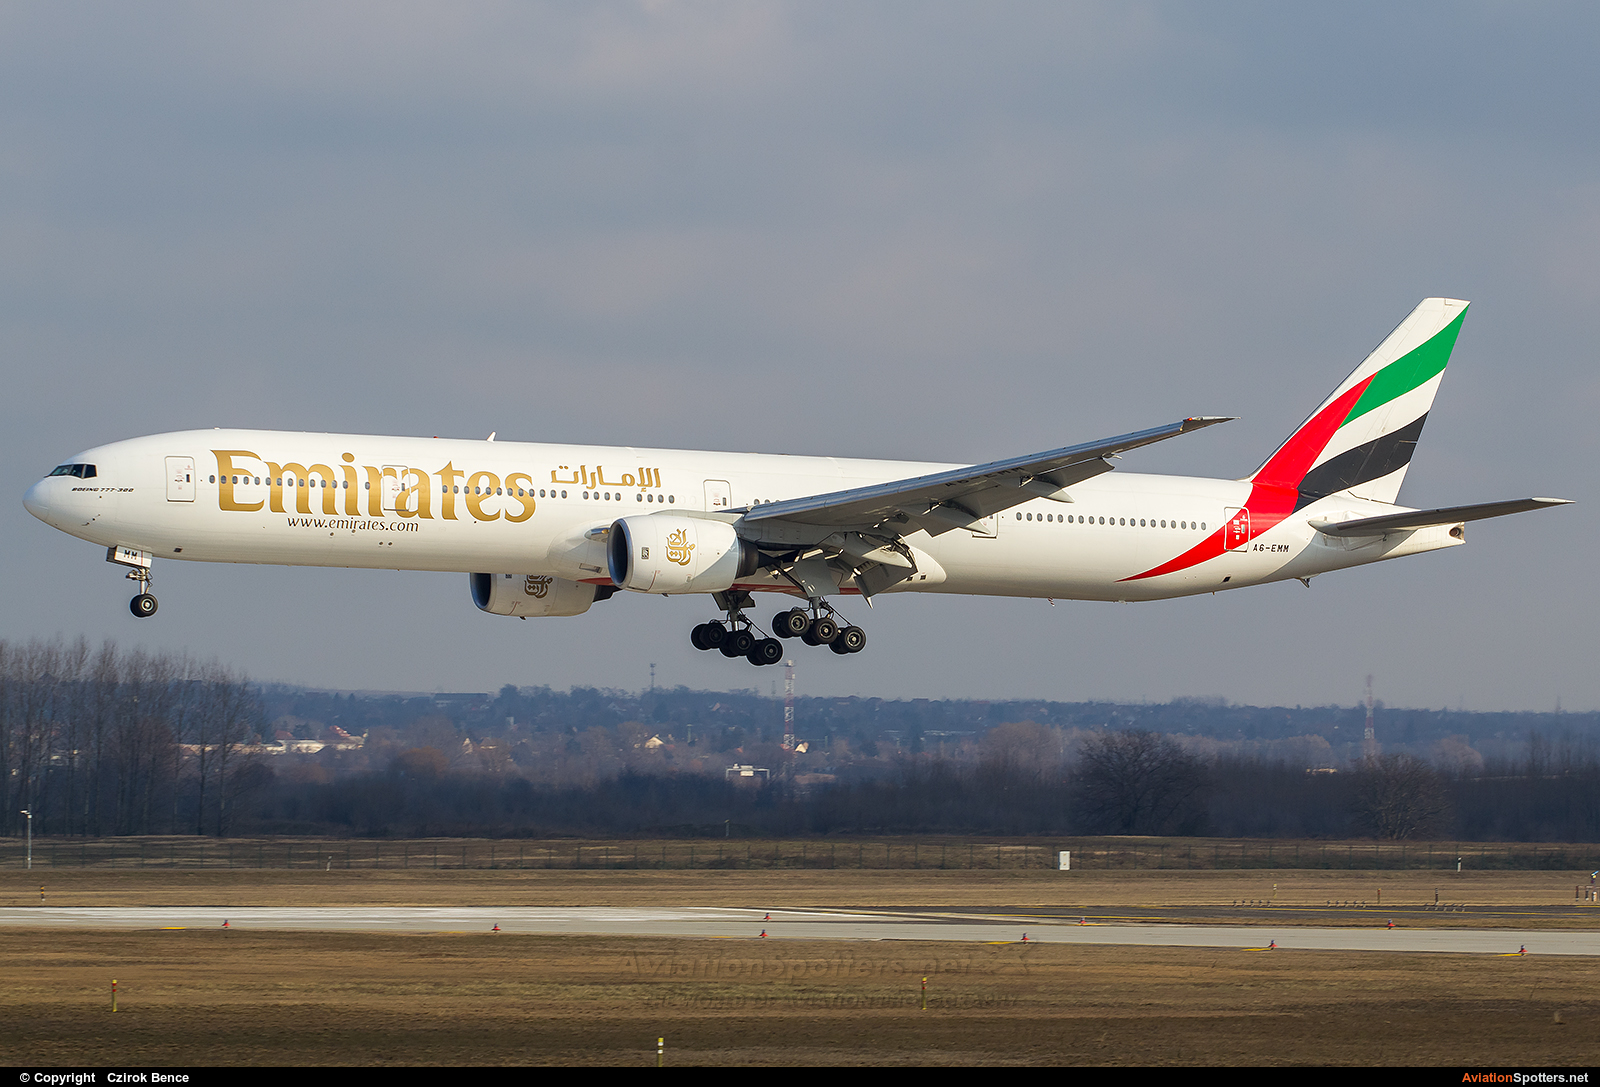 Emirates Airlines  -  777-300  (A6-EMM) By Czirok Bence (Orosmet)